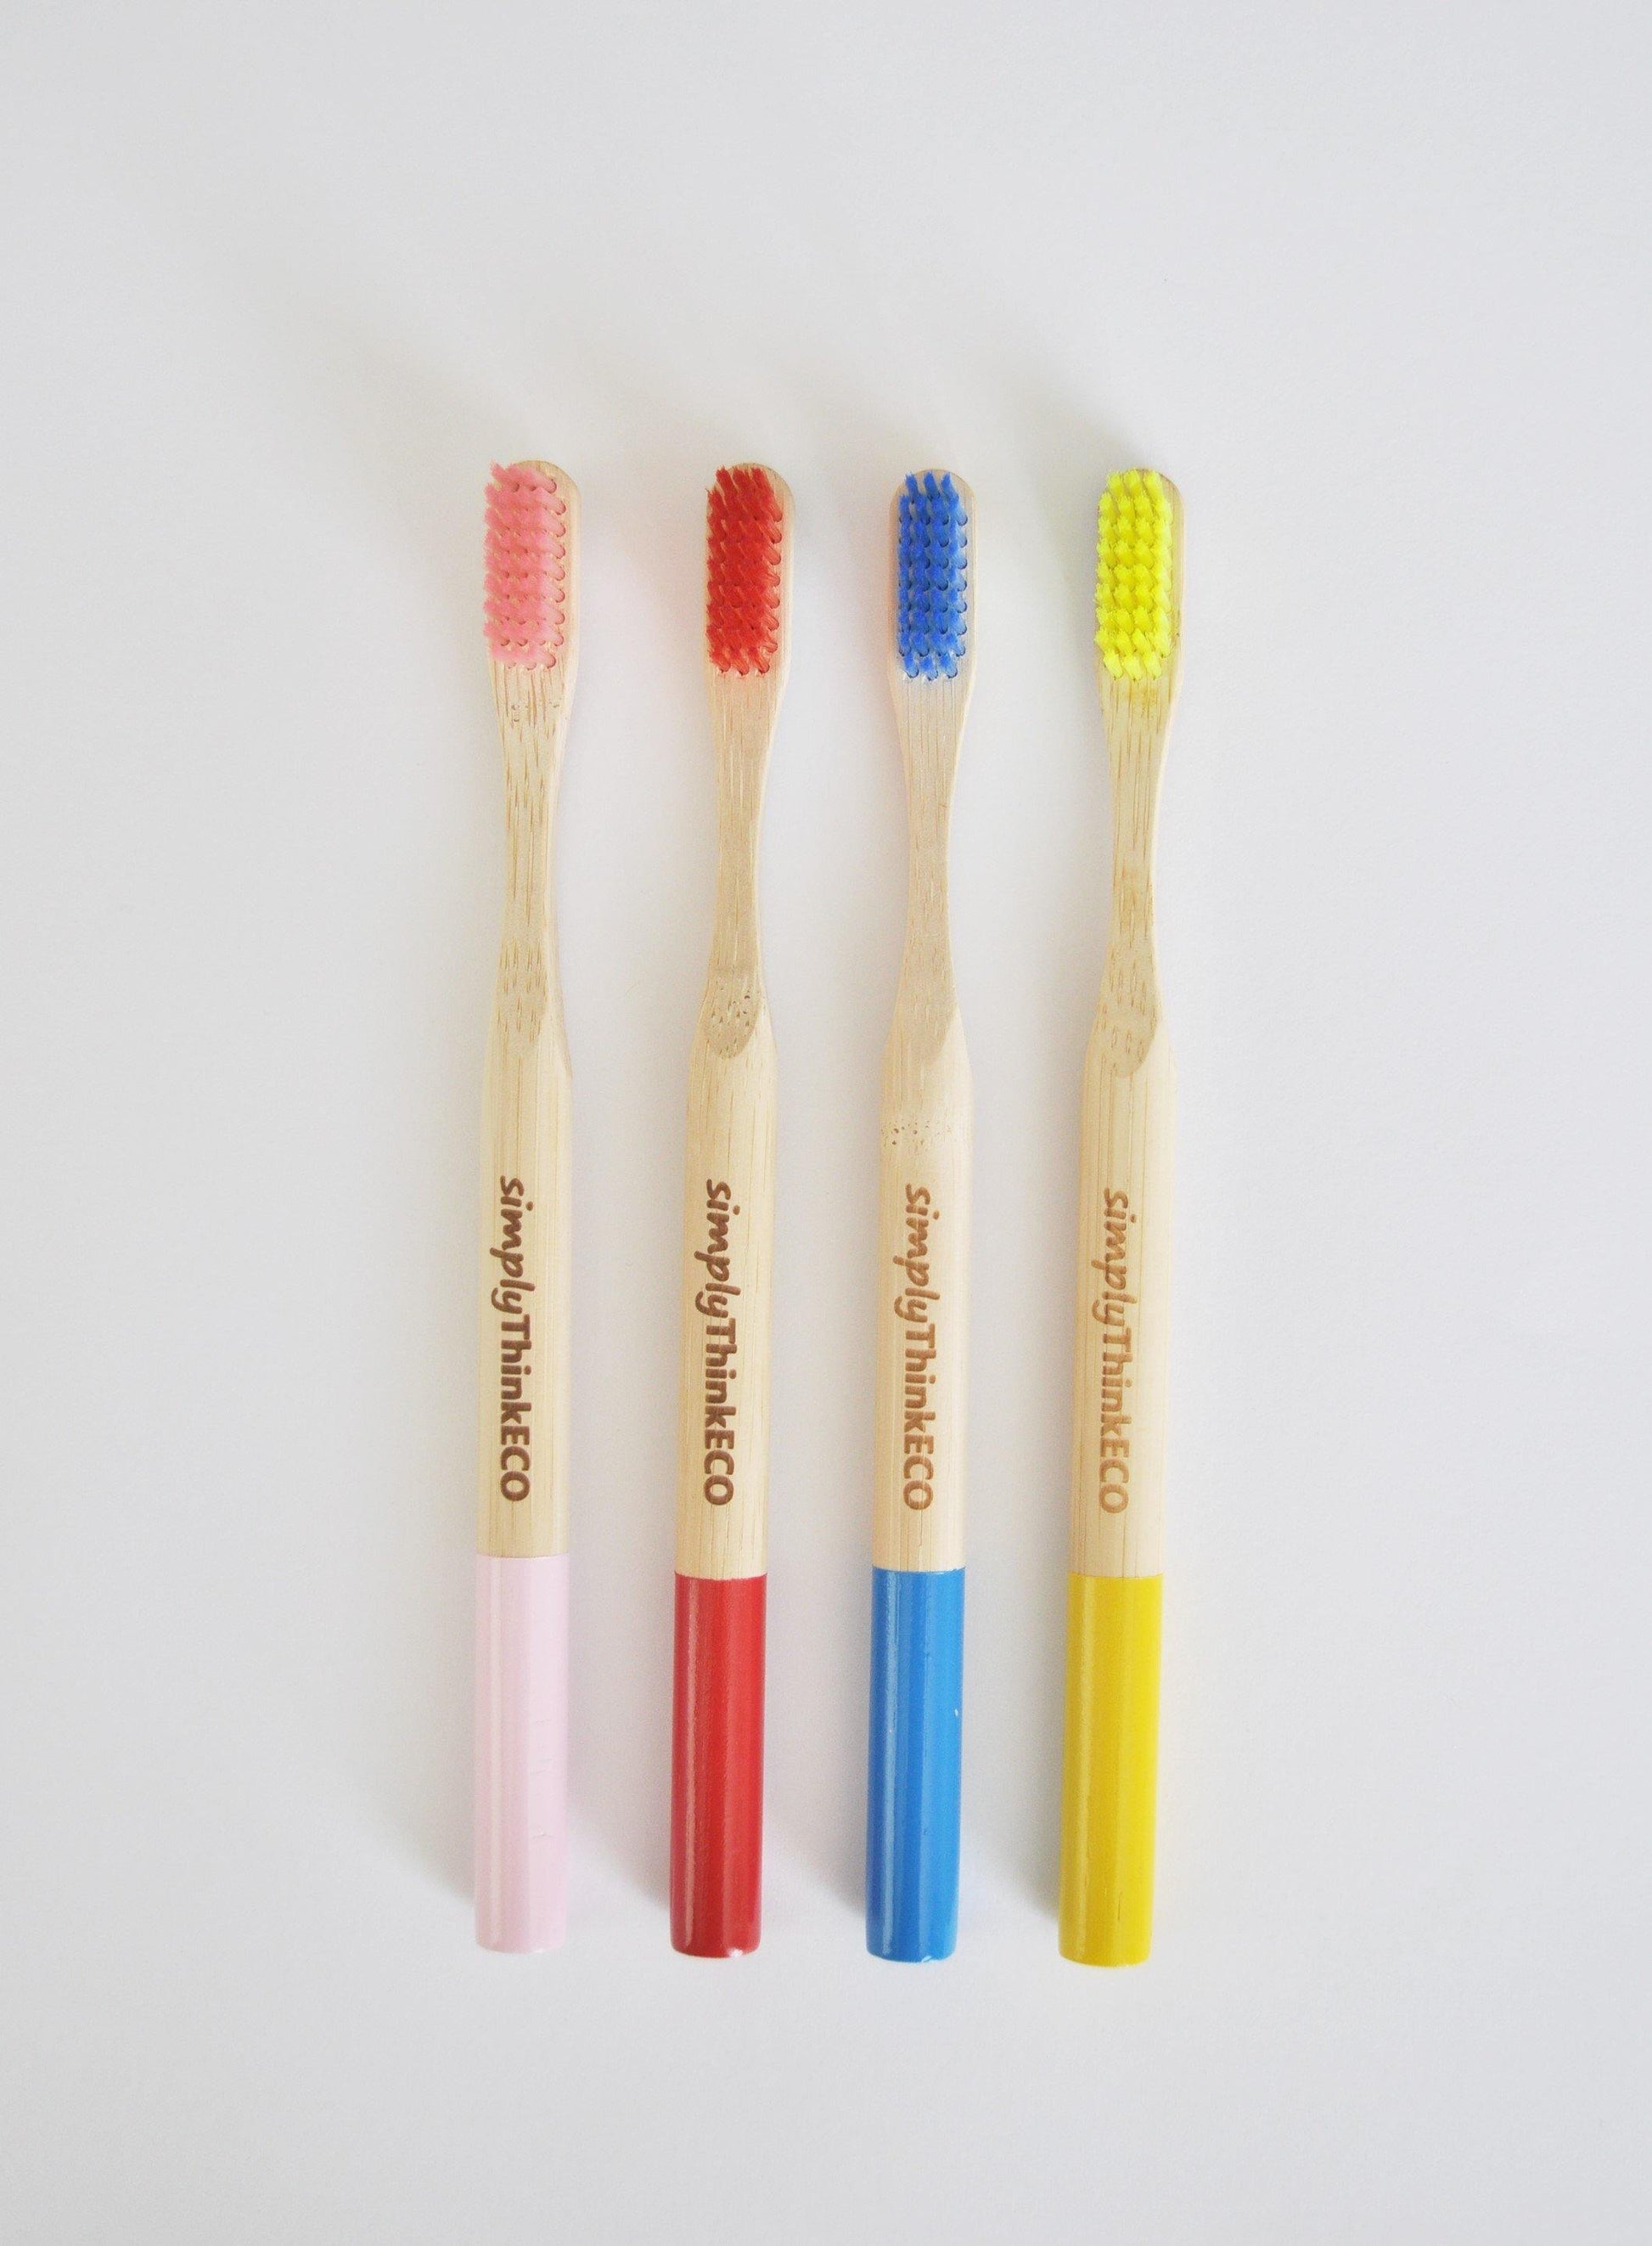 Four Adult Biodegradable Bamboo Toothbrush - Round - Zero Waste Eco Friendly Plastic Free Natural Bamboo Brush - Soft Bristle - simplyThinkECO